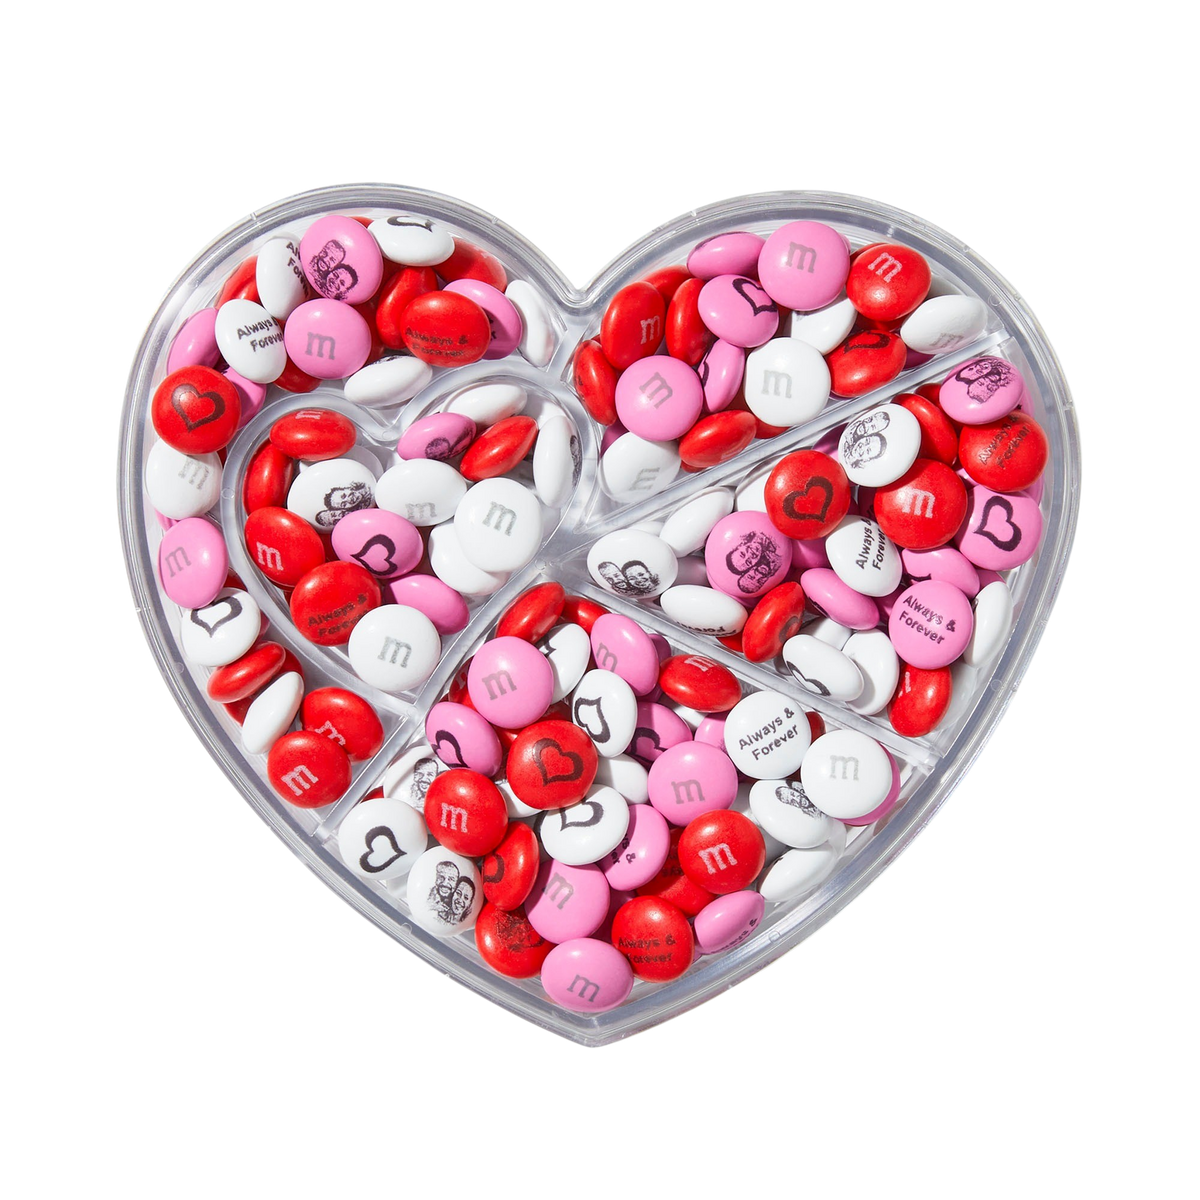 25%Off All Site M&M's Valentine's Day $18.74 for bear gift box 